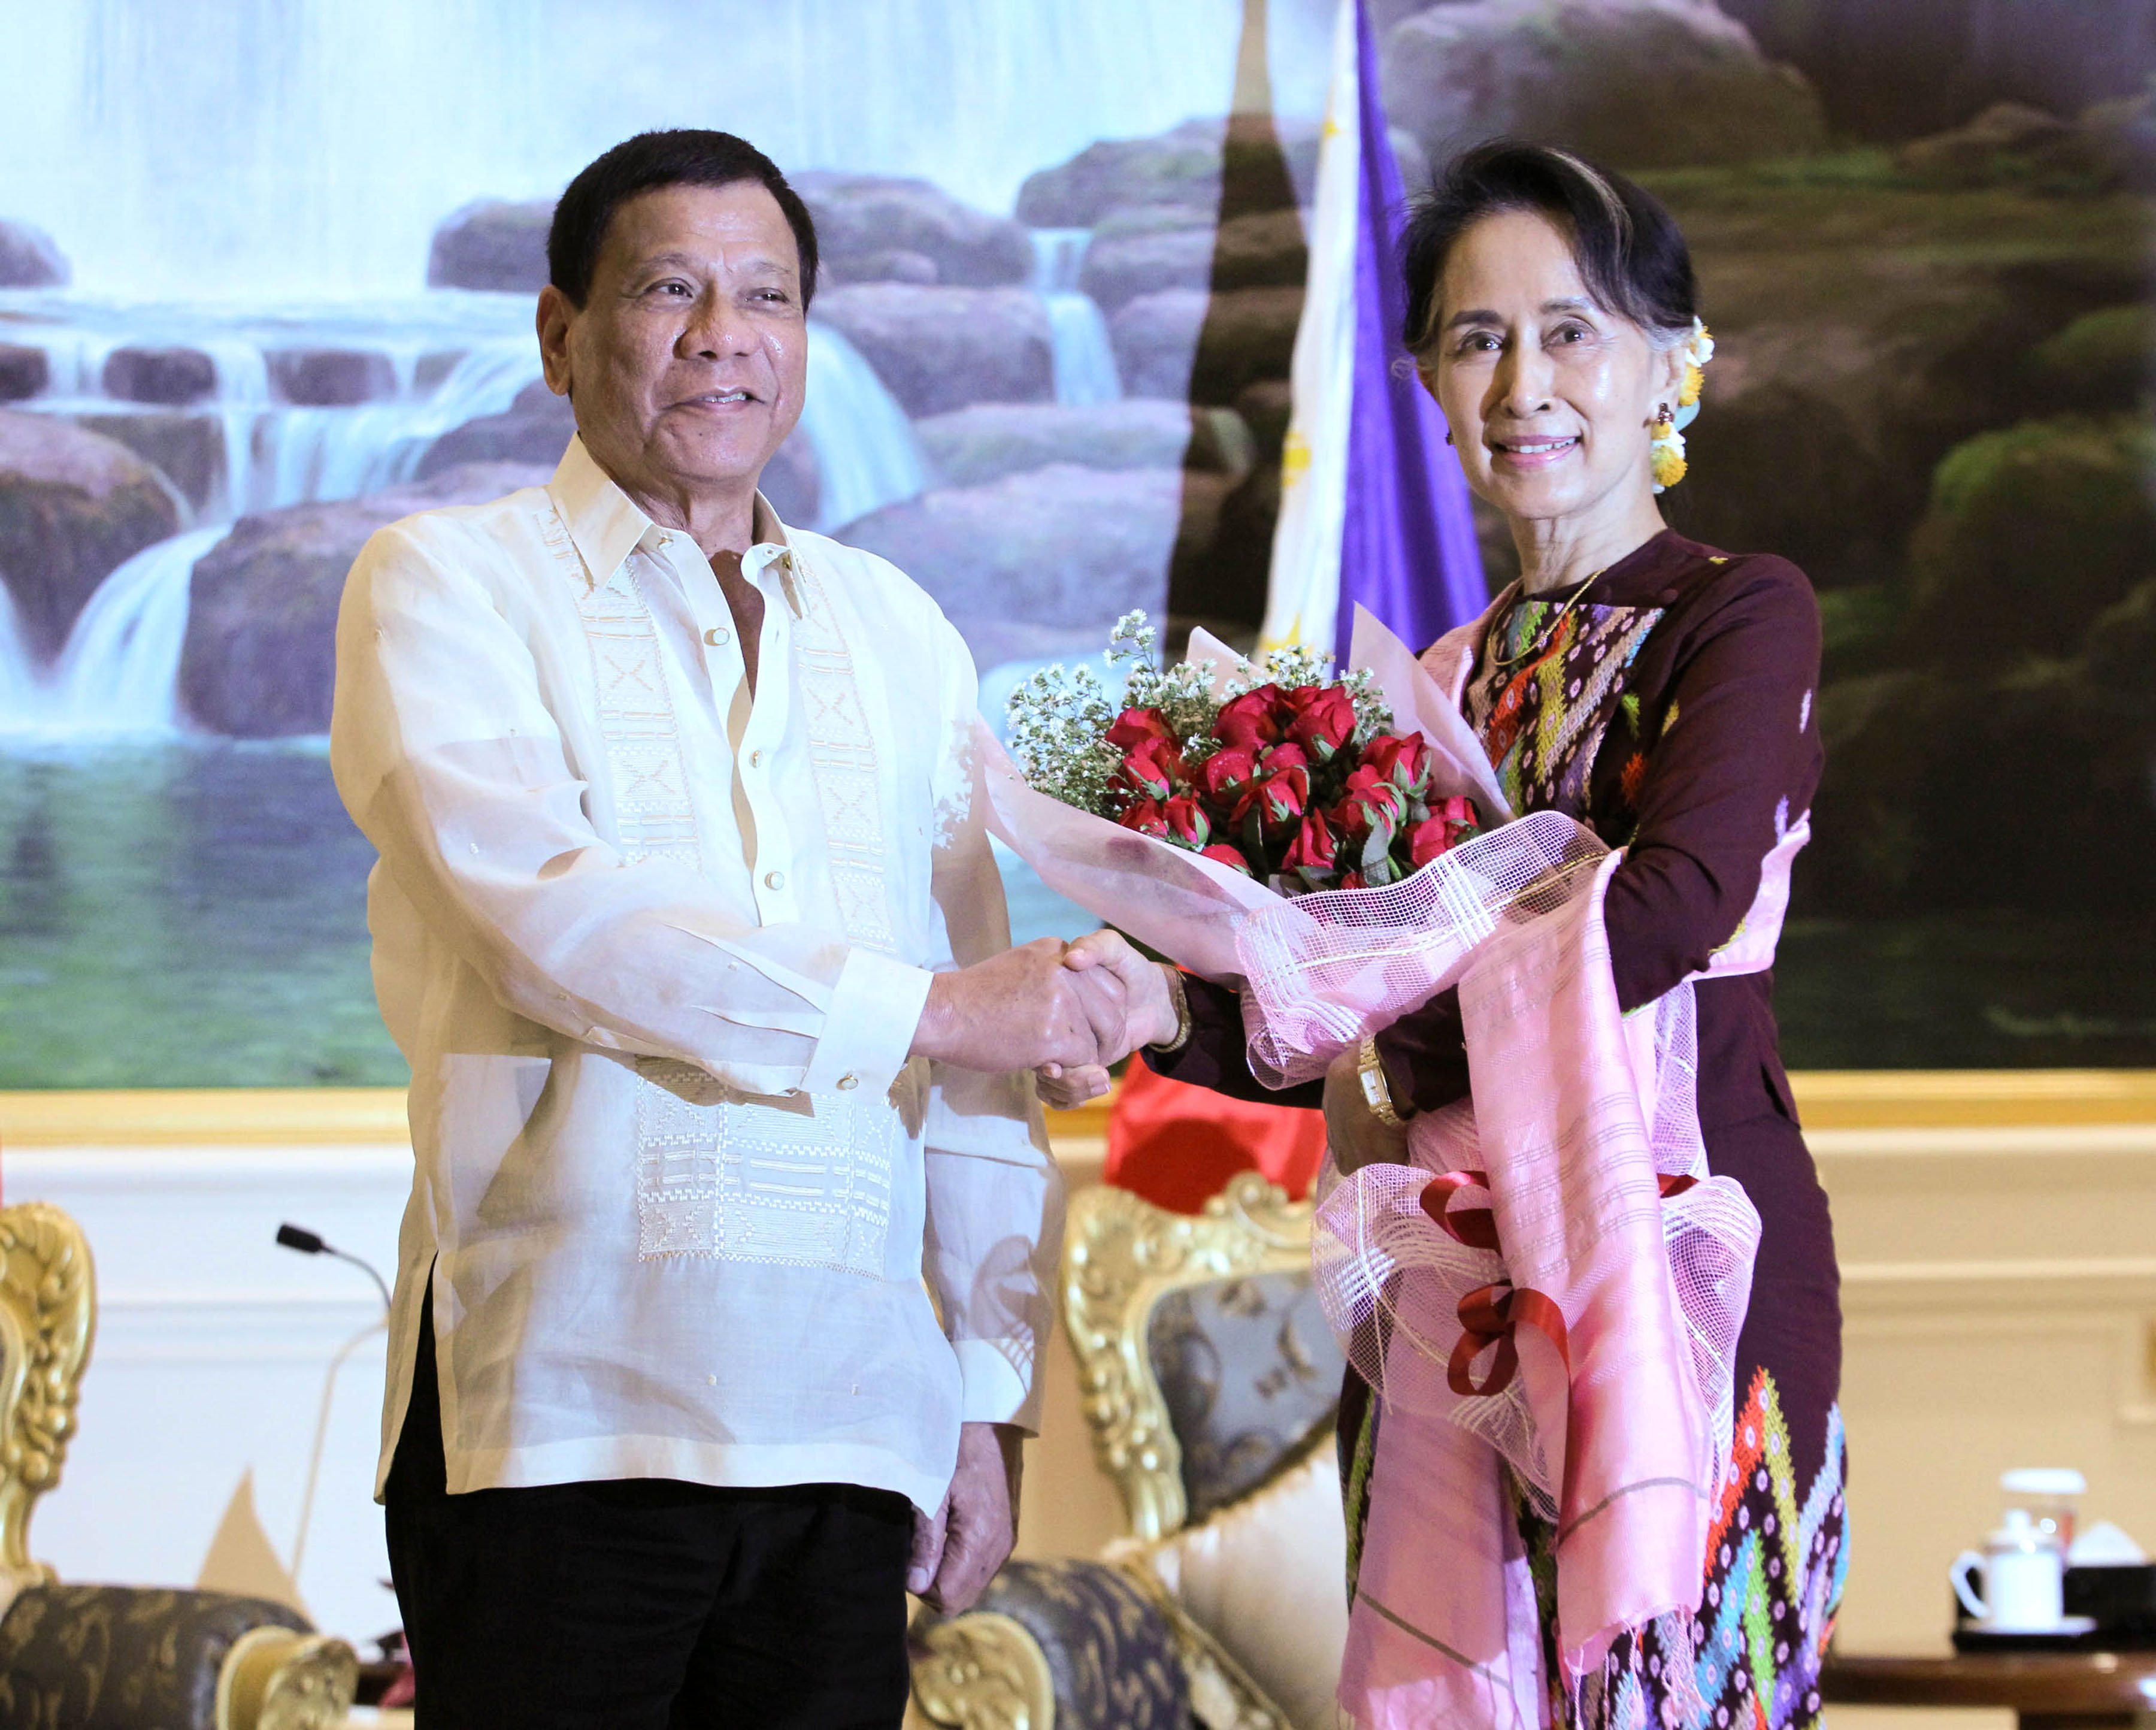 PRRD hands a bouquet of flowers to Myanmar Minister for Foreign Affairs Aung San Suu Kyi